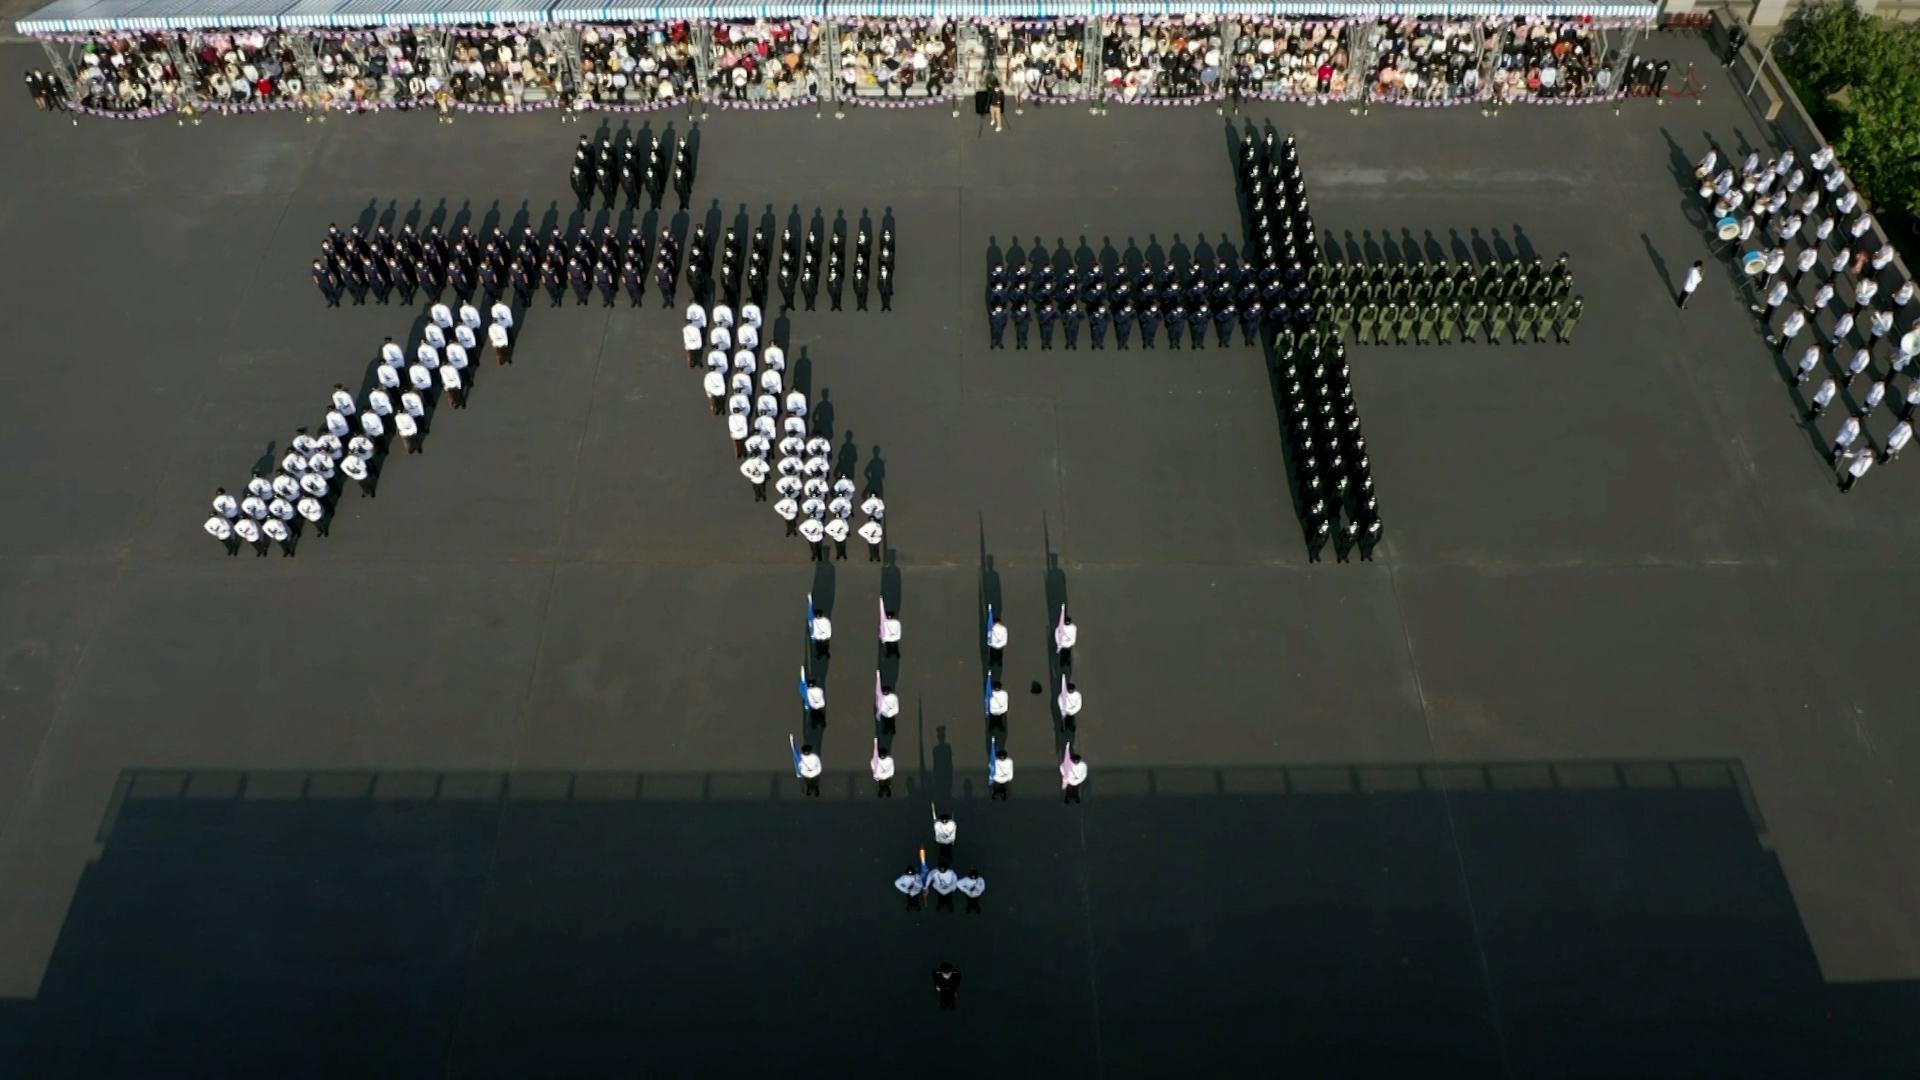 The Immigration Department Passing-out Parade cum 60th Anniversary Grand Parade was held today (December 30). Photo shows the parade lining up to form the Chinese numerals for "60" in the Chinese-style foot drill performance to symbolise the 60th anniversary of the Immigration Department.